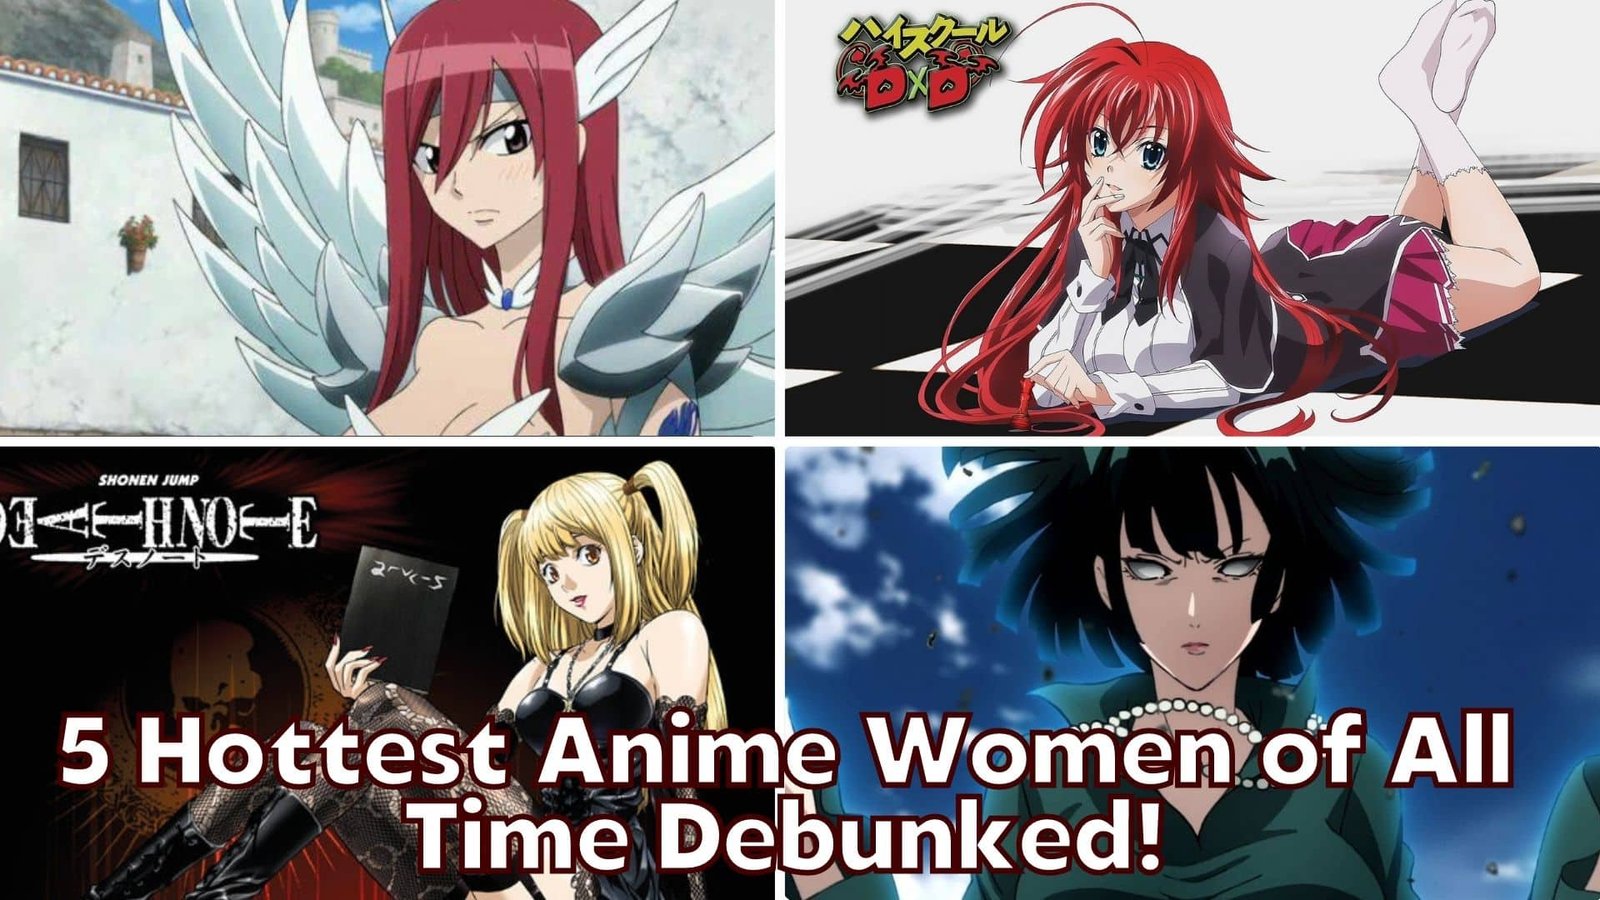 5 Hottest Anime Women of All Time Debunked!